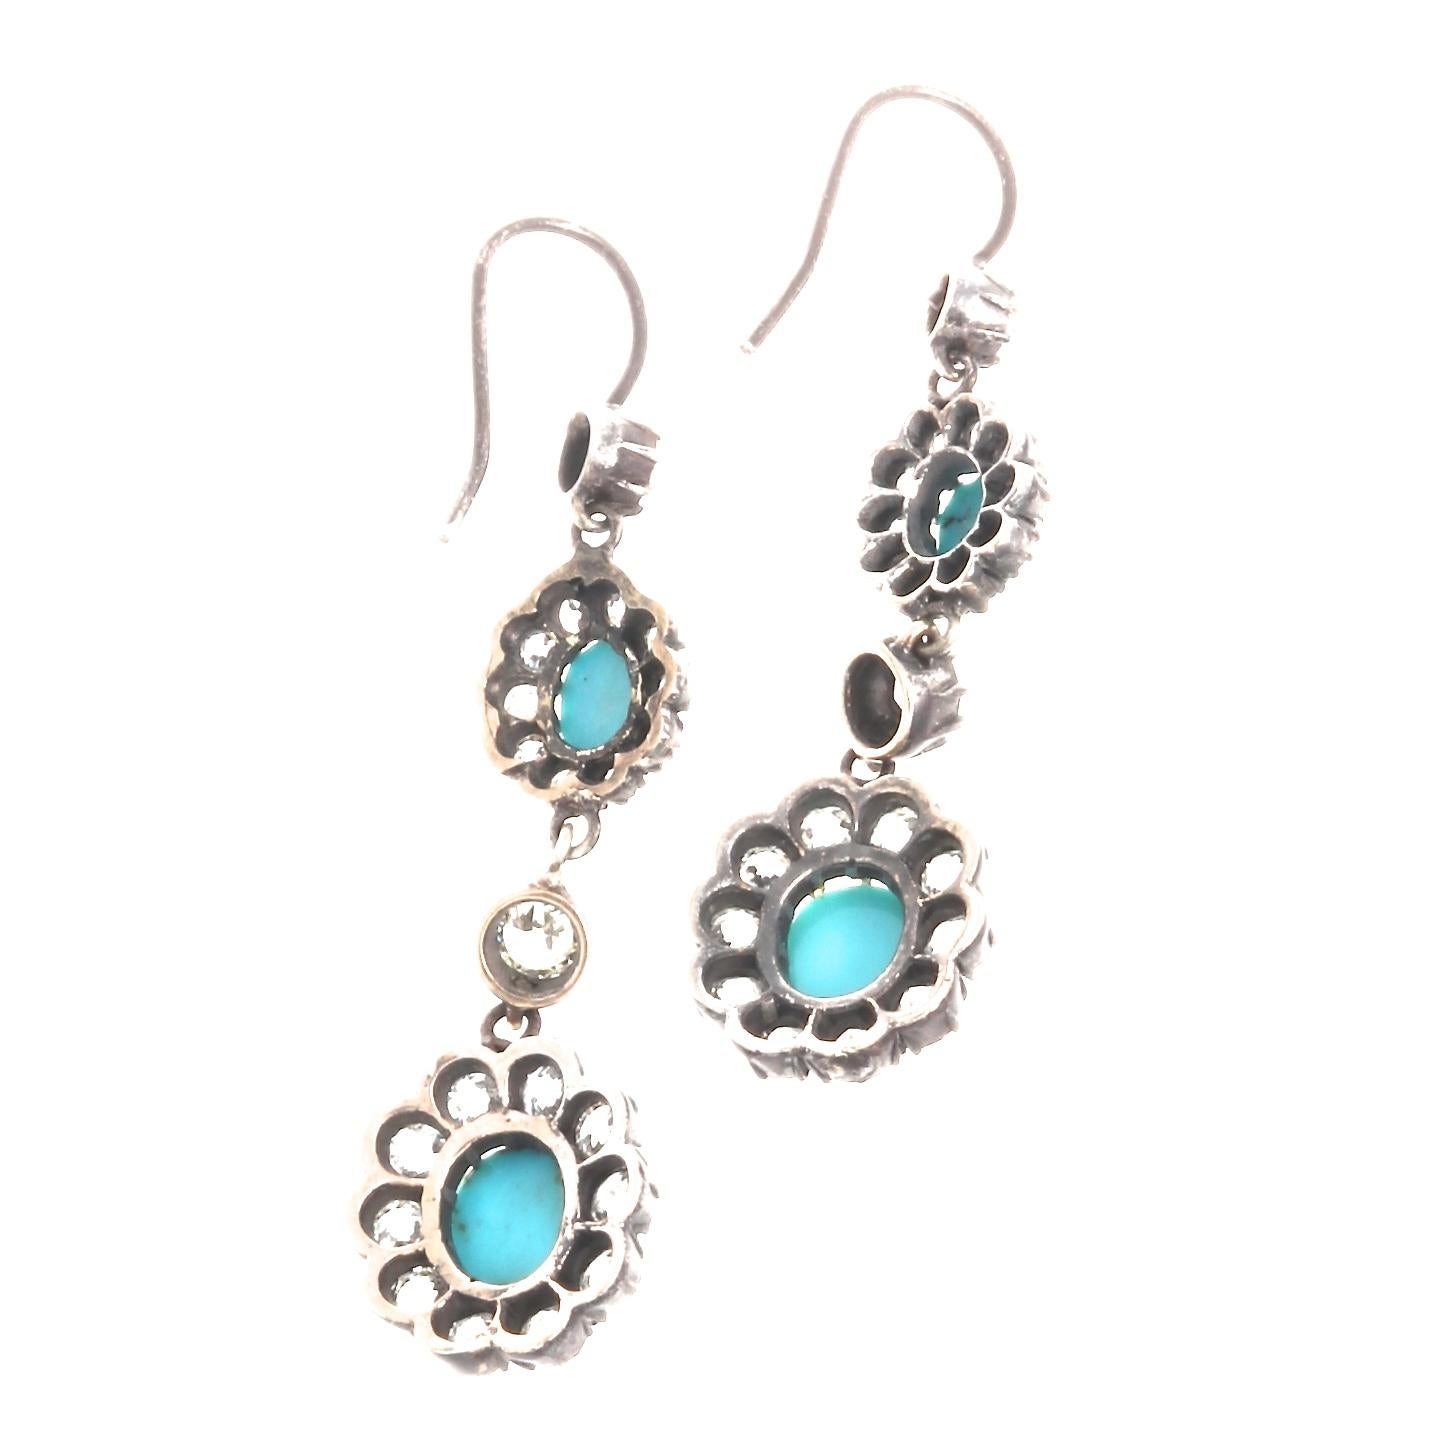 A joyful creation capturing the ever-changing styles of the long lasting victorian era. Featuring elegant drops of near colorless diamonds and beaming cabochon cut turquoise clusters flowing effortlessly down each ear. Hand crafted in 18k gold and